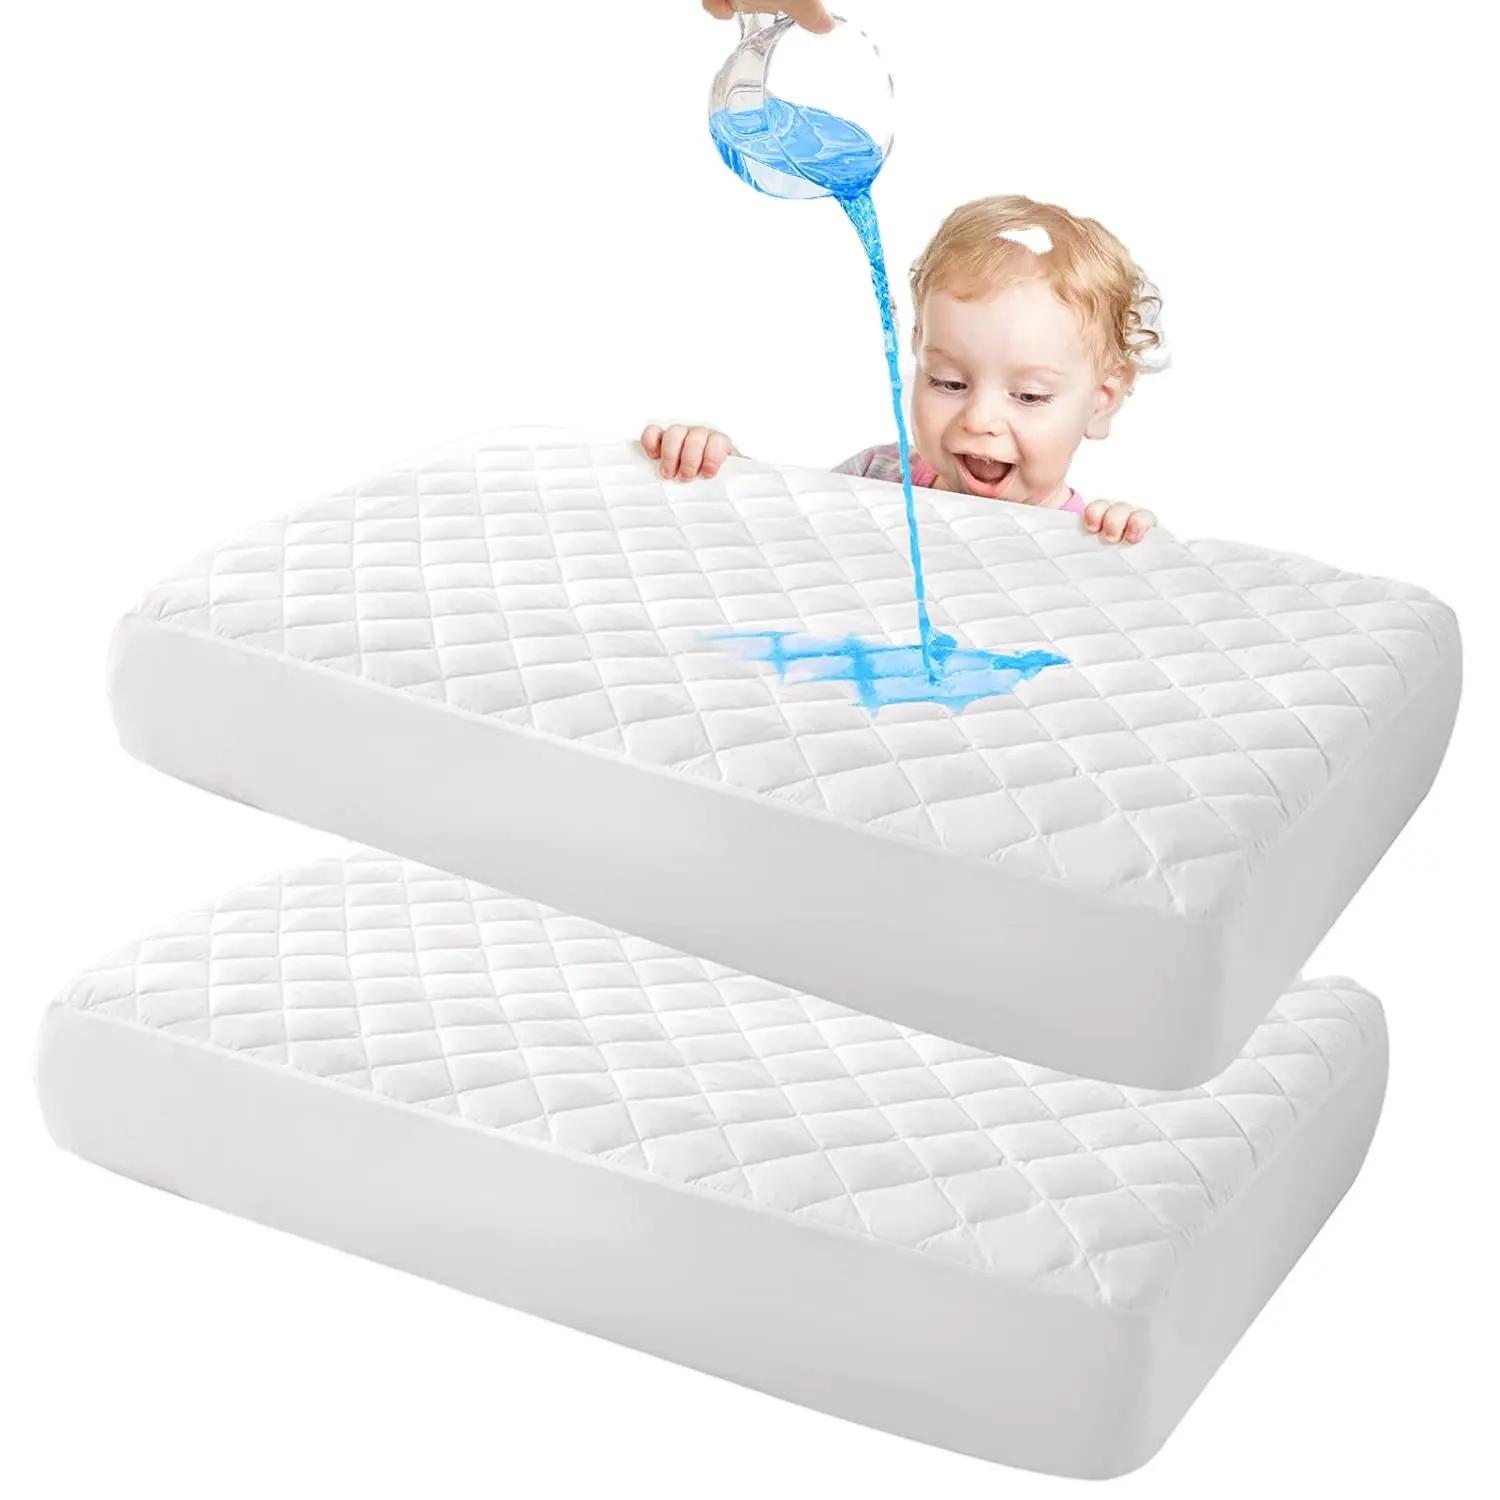 OEM Newborn Quilted Crib Topper Pad Mattress Protector Cover Waterproof Baby Fitted Bed Sheet